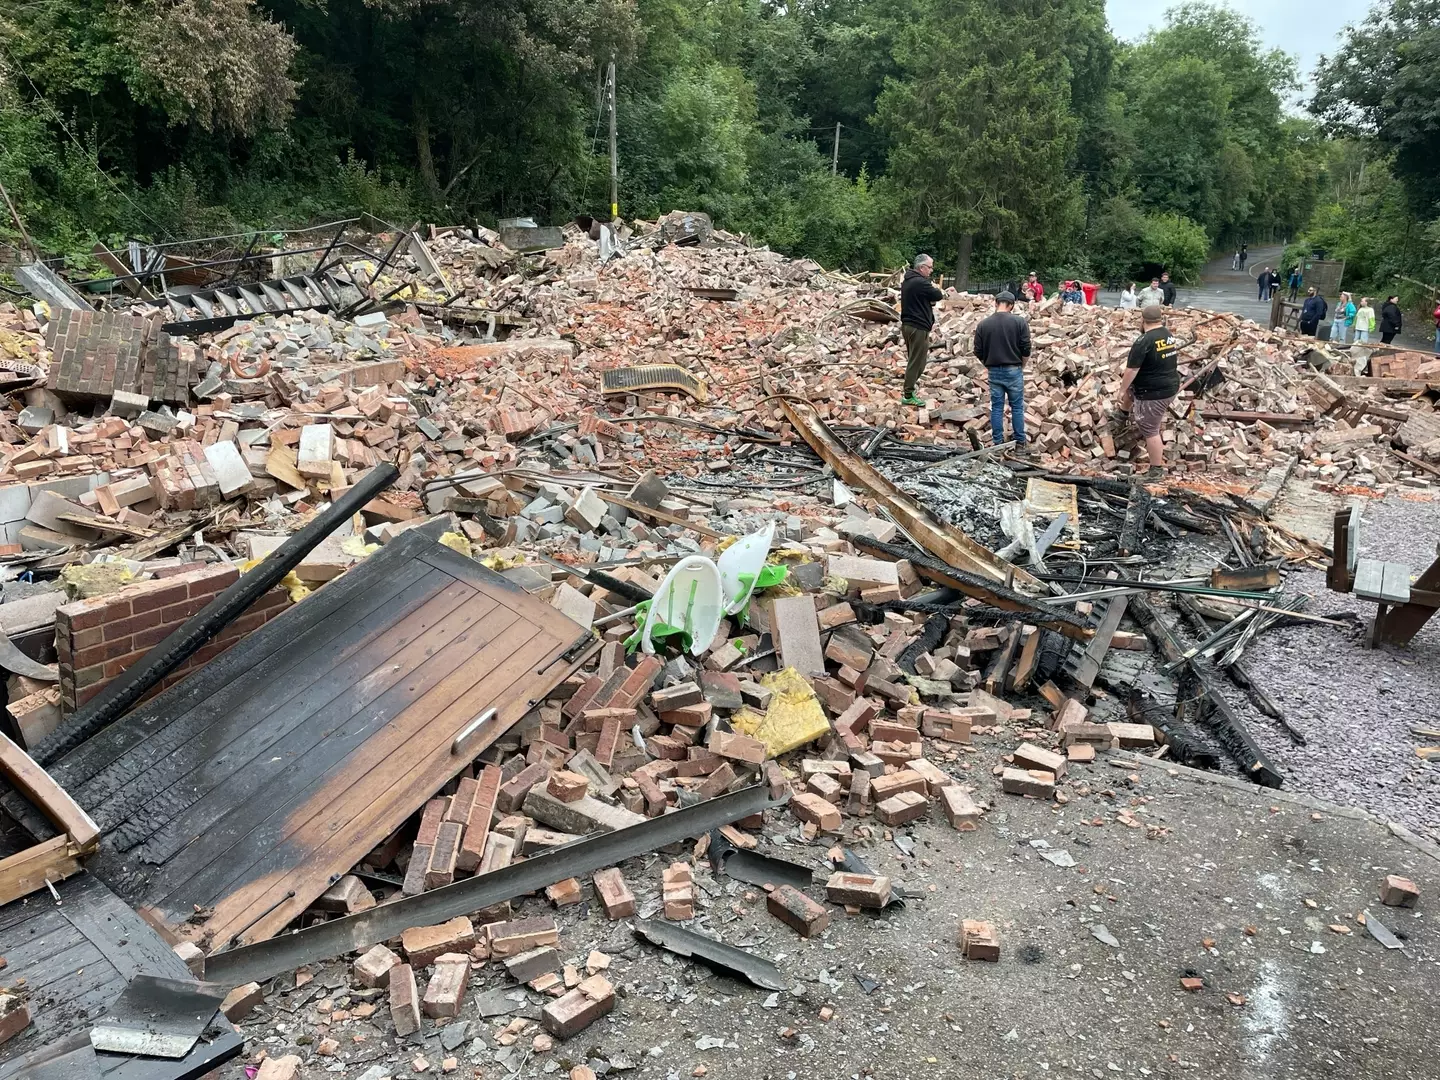 The well-known 18th-century pub in Himley, Dudley, was extensively damaged by a fire on Saturday evening (5 August) before footage emerged on social media of what remained of the building being demolished by a mechanical digger.